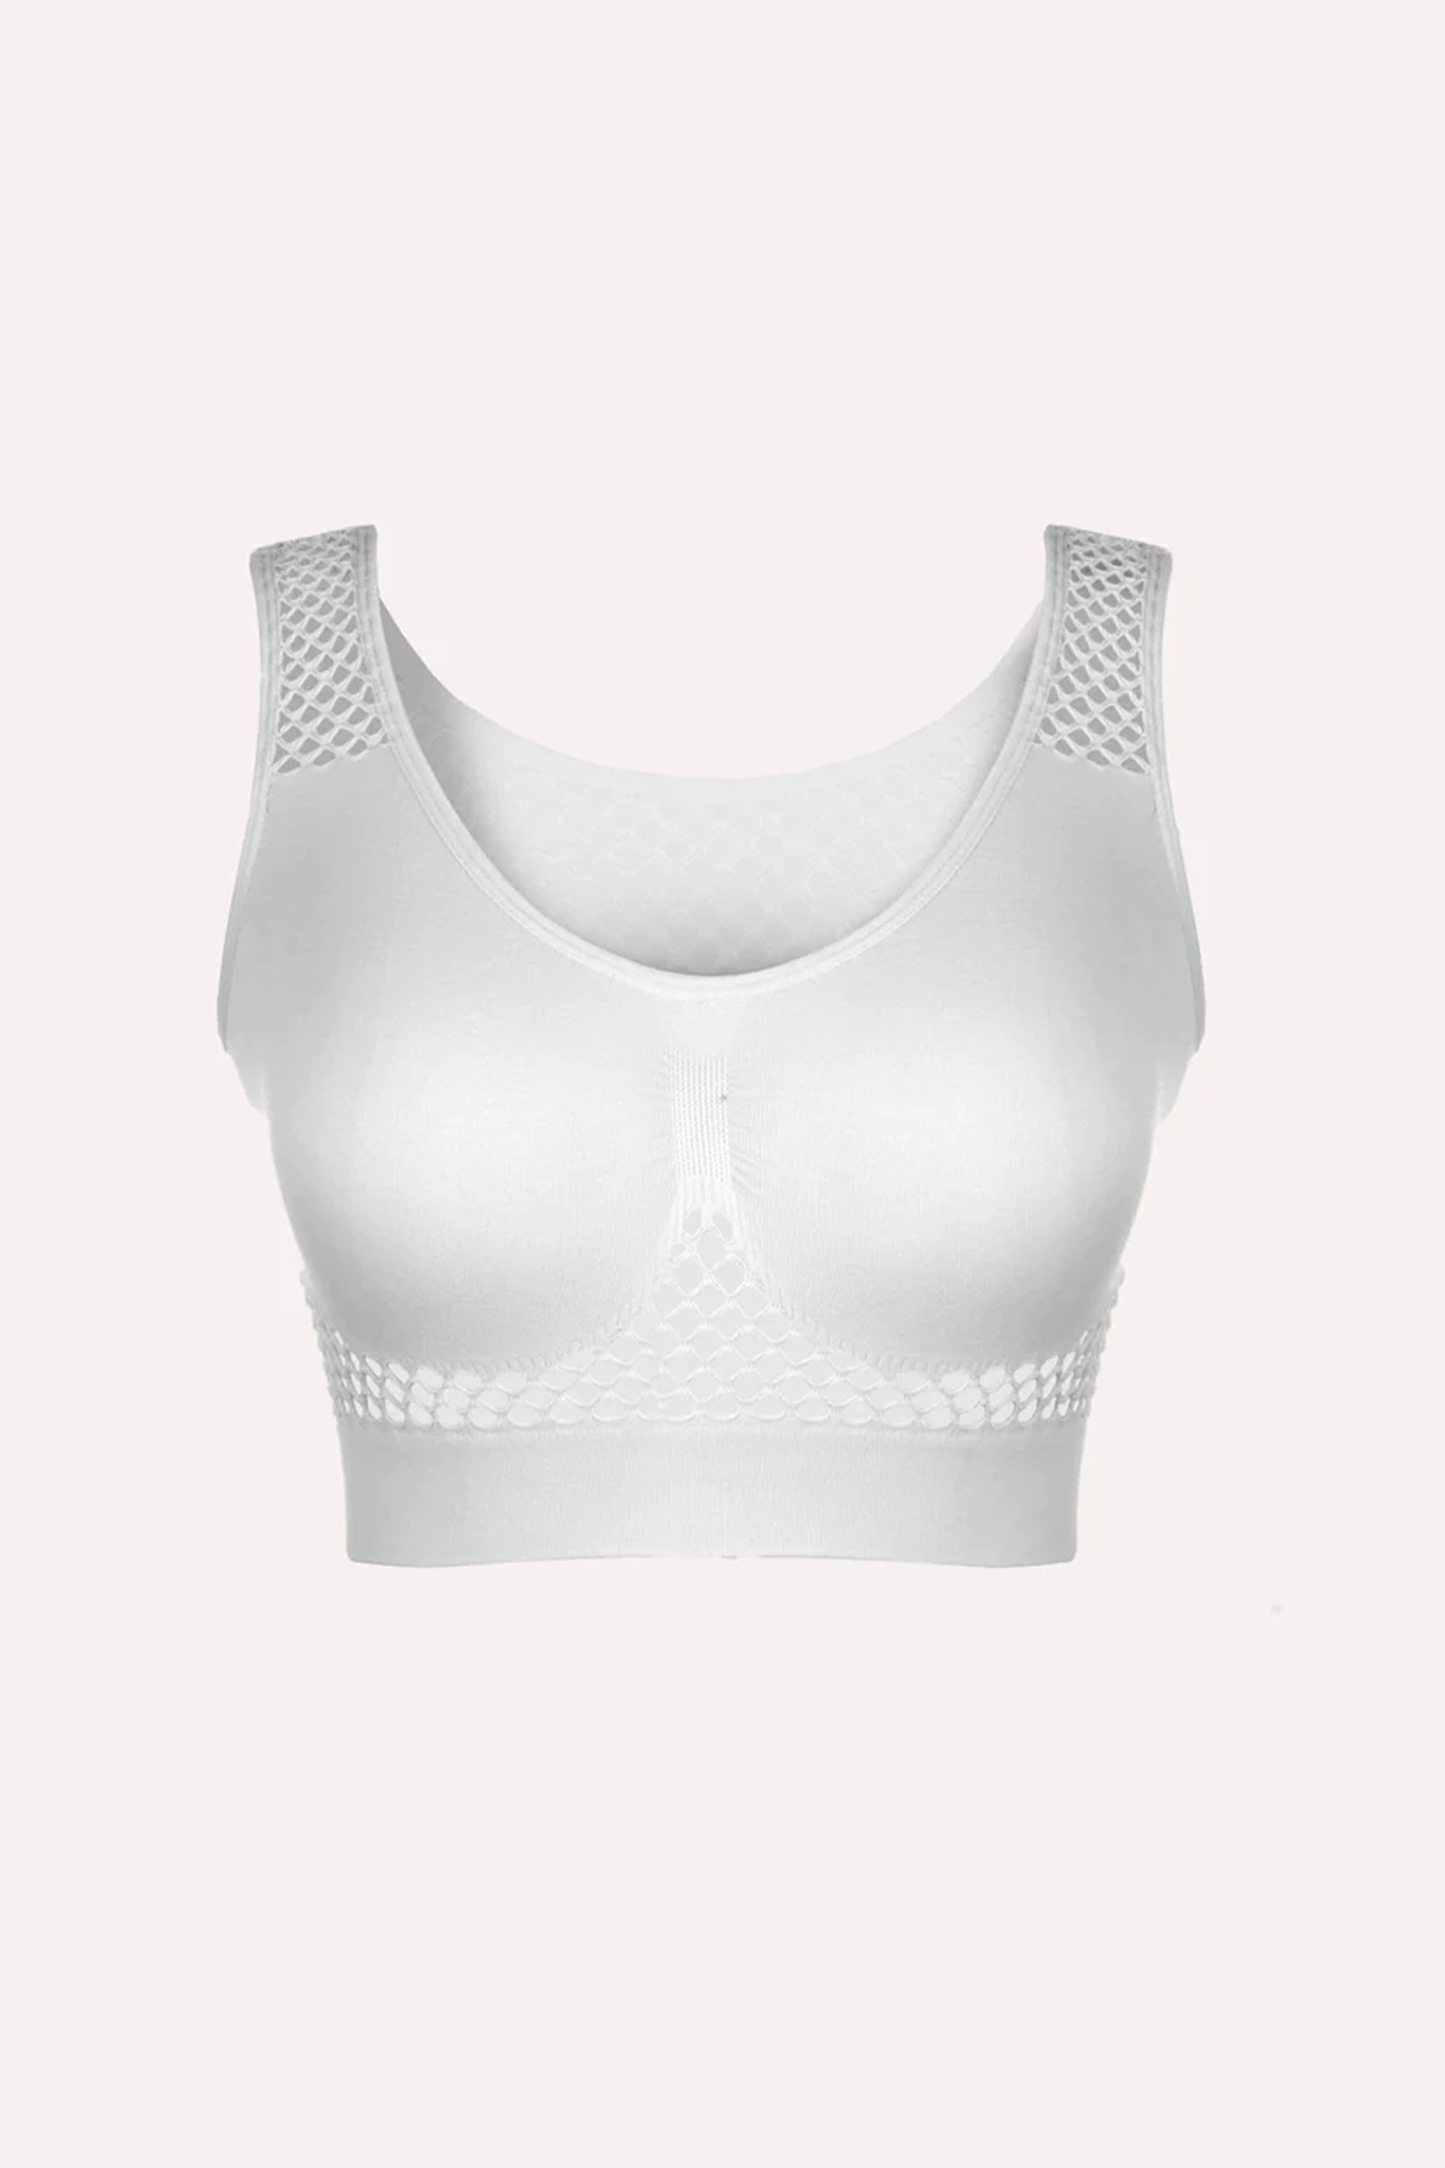 AXXD Sports Bras For Women Girl Magnetic White Bralette U-Neck Mesh Padded  Invisible Lingerie For Clearence